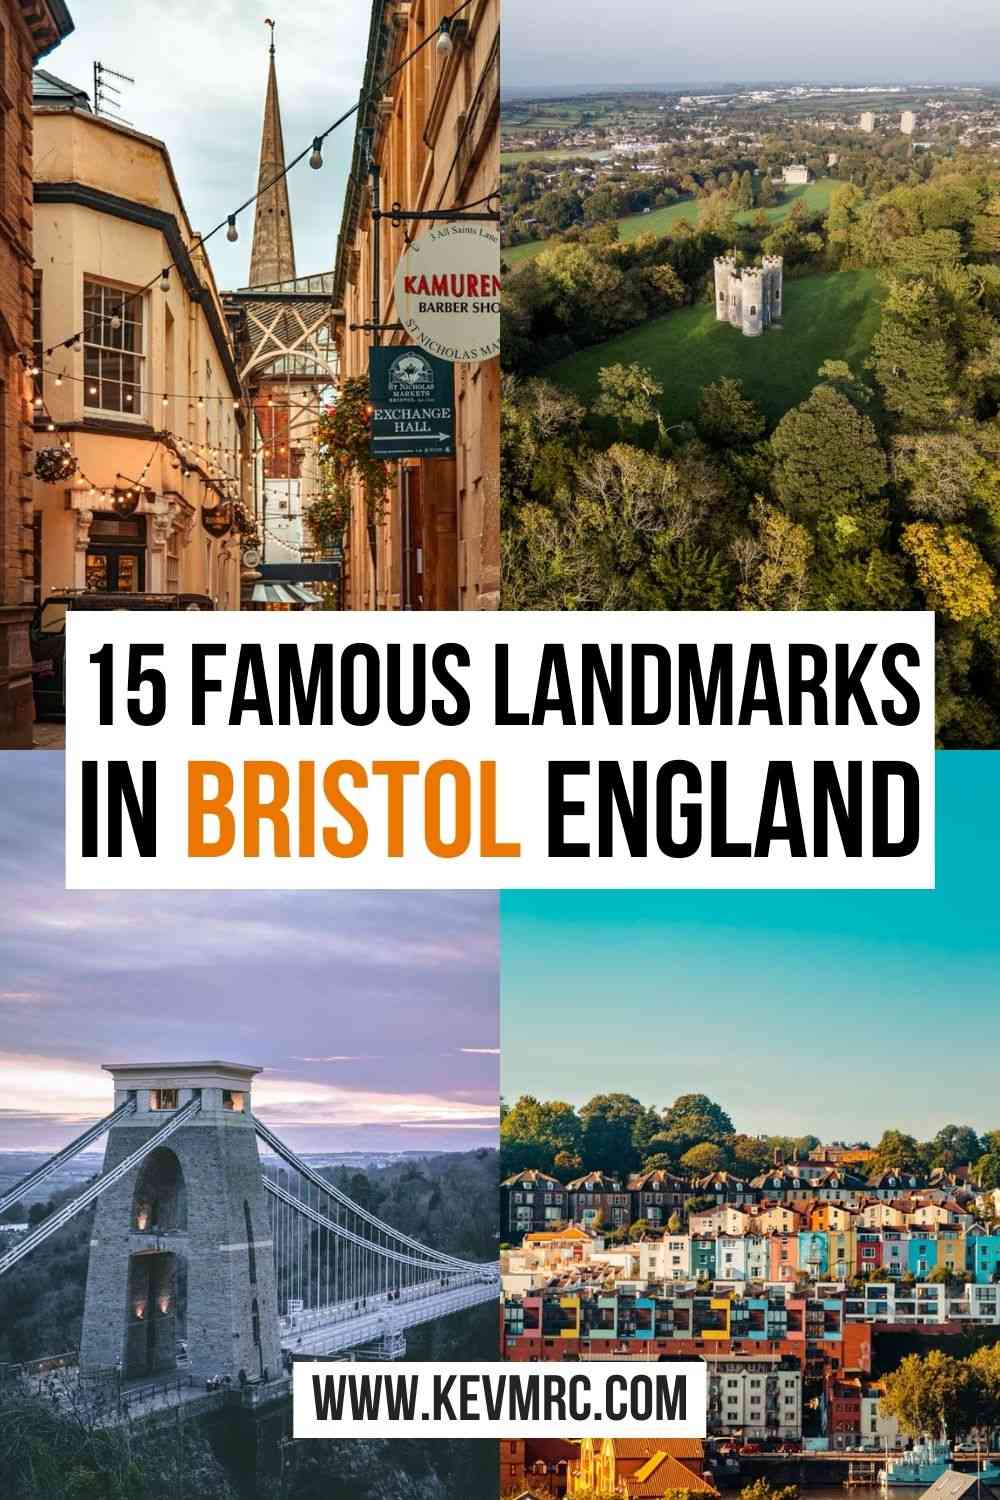 If you think there's nothing to do when you come to visit Bristol, think again because it's one of the most vibrant cities in England! With over 460,000 people, Bristol is the 8th largest city in the United Kingdom and the 6th largest in England. Here are the 15 famous landmarks in Bristol, England. #england #bristol